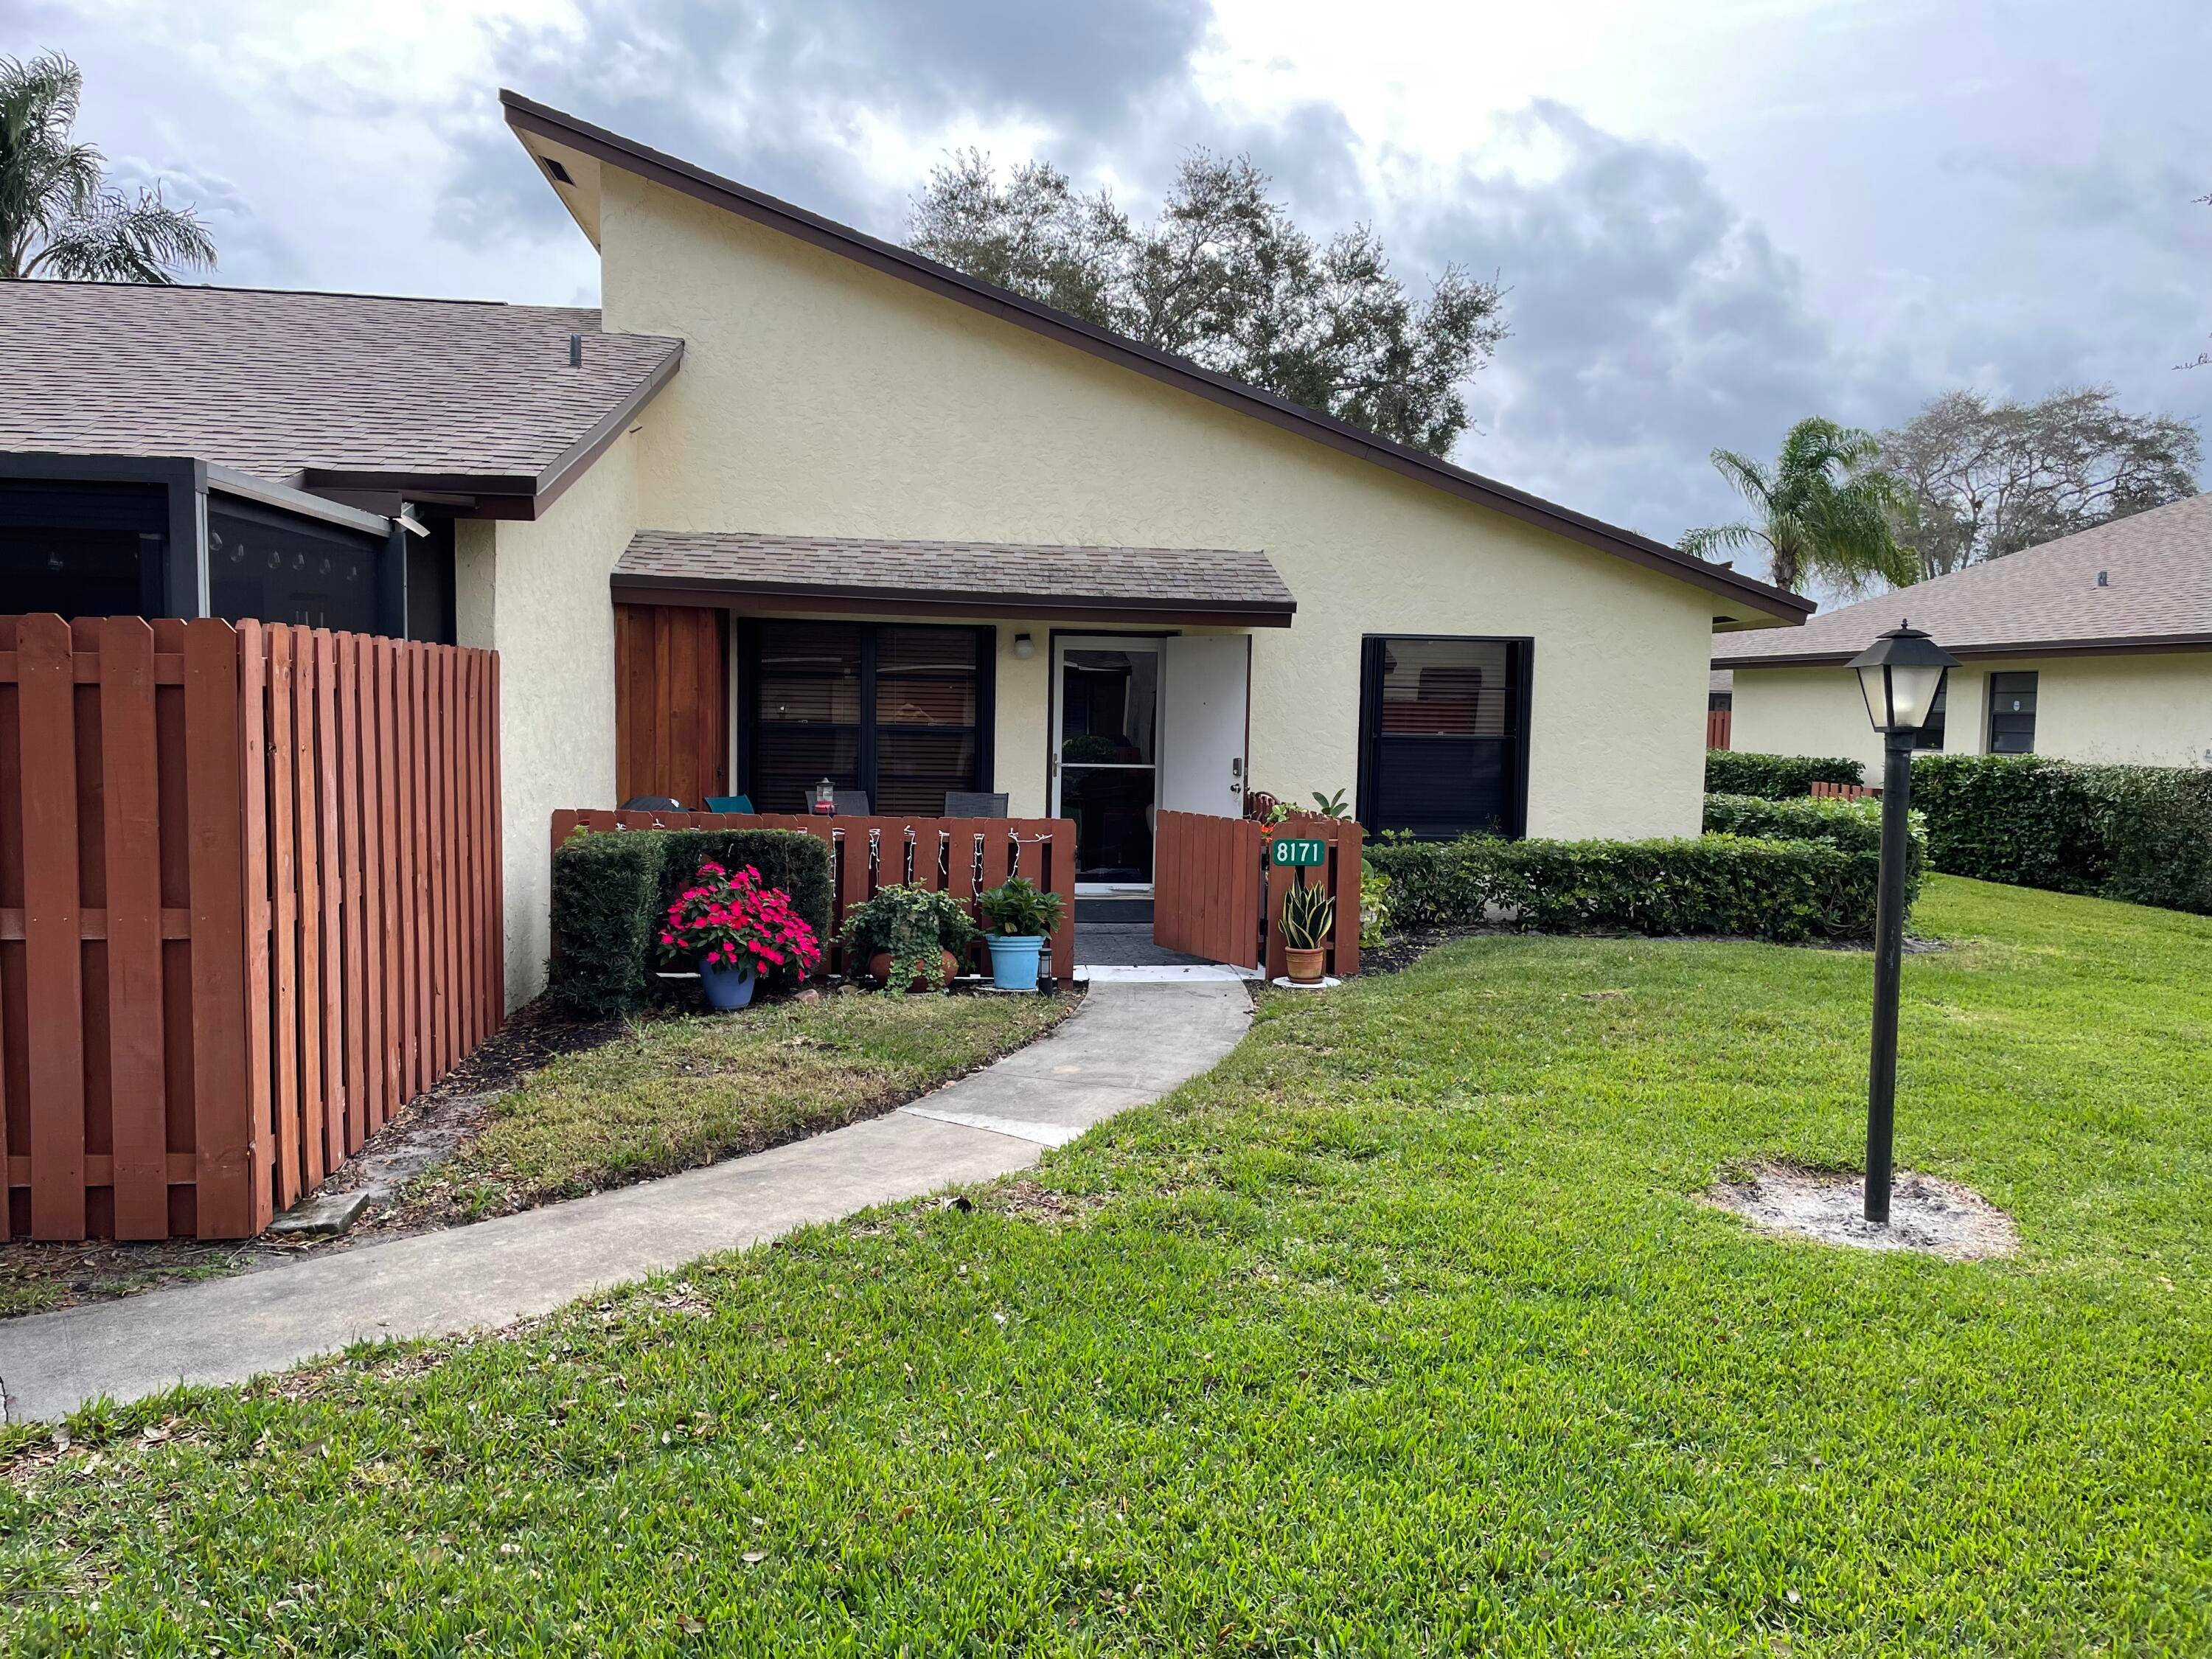 FOR SALE BY OWNER Located at 8171 SE Villa Way 2720 A in Hobe Sound, FL 33455, this charming condo offers 2 bedrooms and 2 bathrooms within its 1, 126 ...